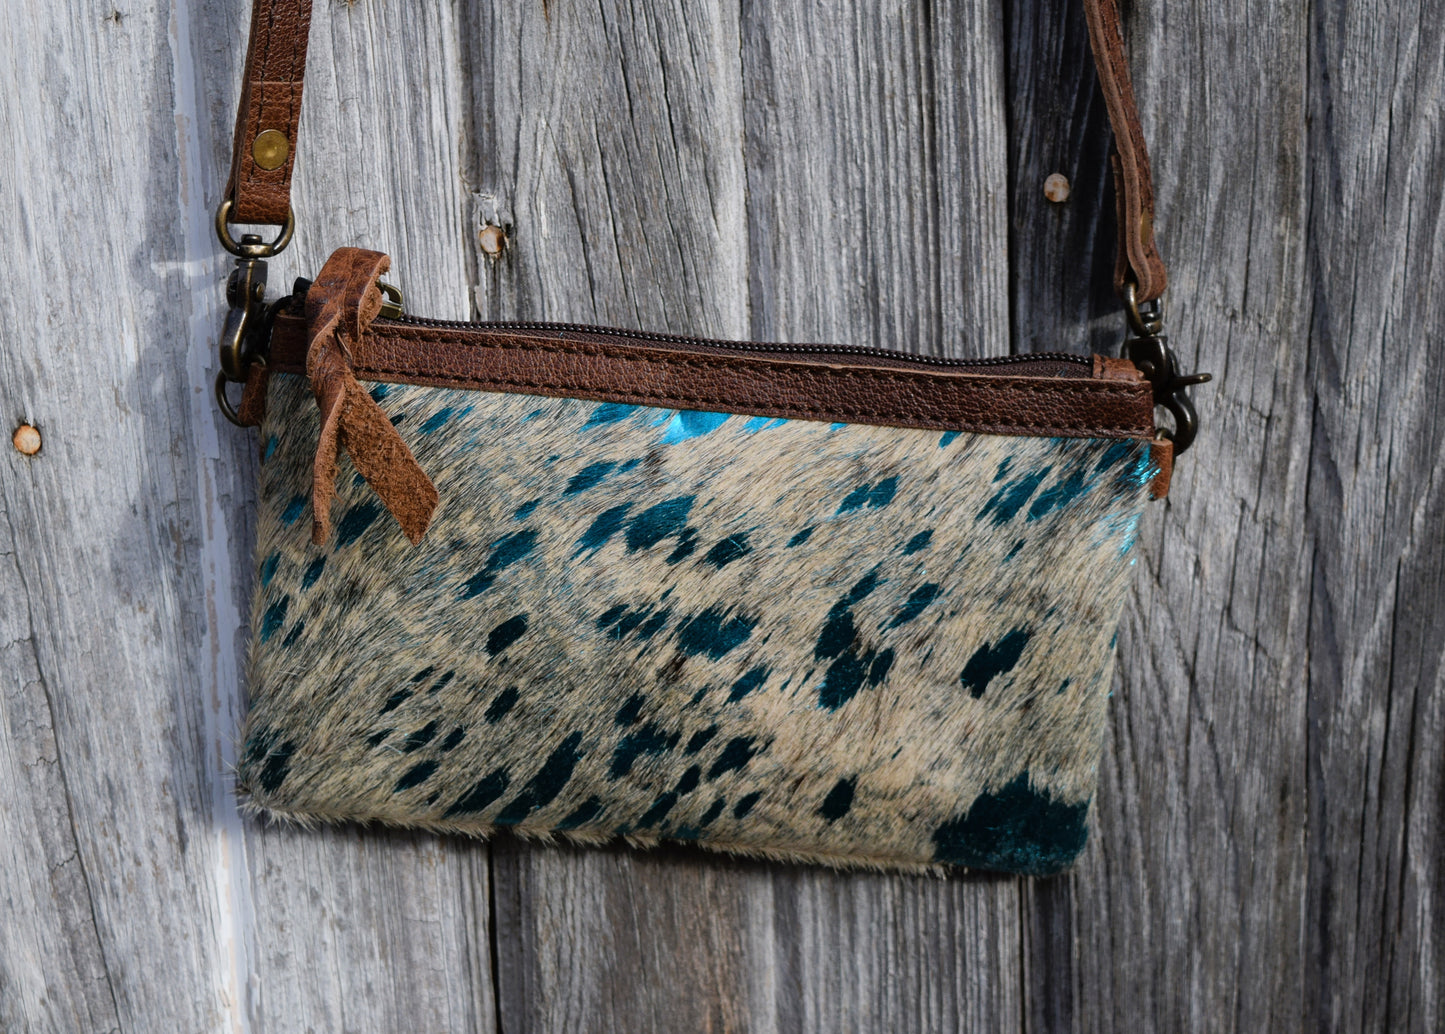 Beige Turquoise Acid Washed Cowhide Clutch Purse